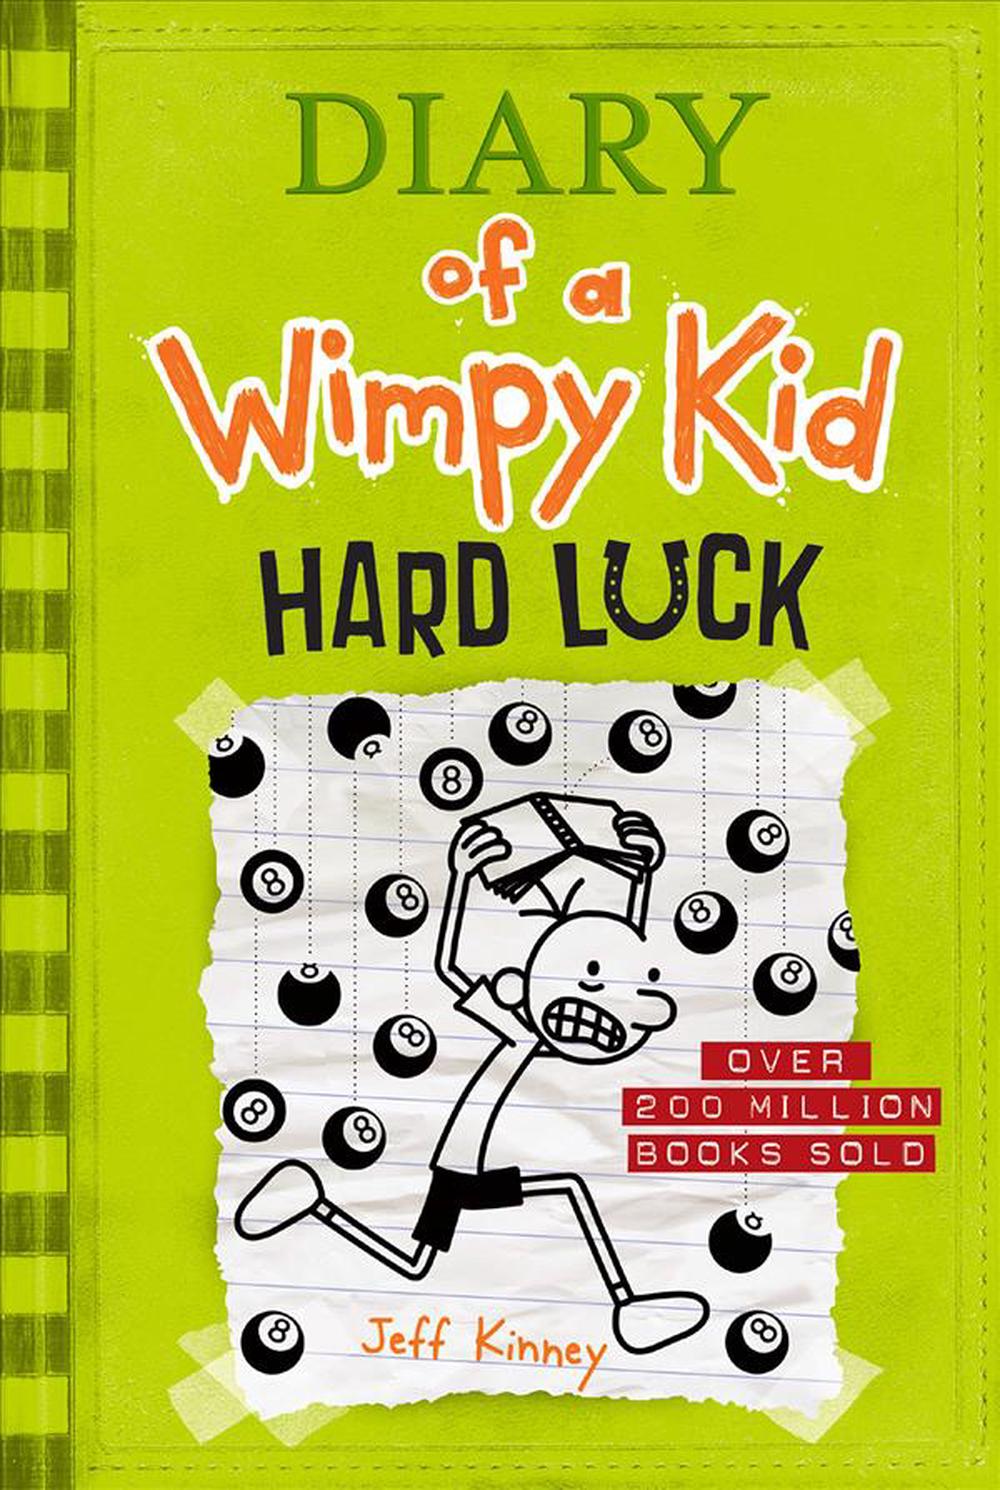 Diary of a Wimpy Kid by Jeff Kinney 12 Book Collection Set Box Set - A –  Just Kids Books